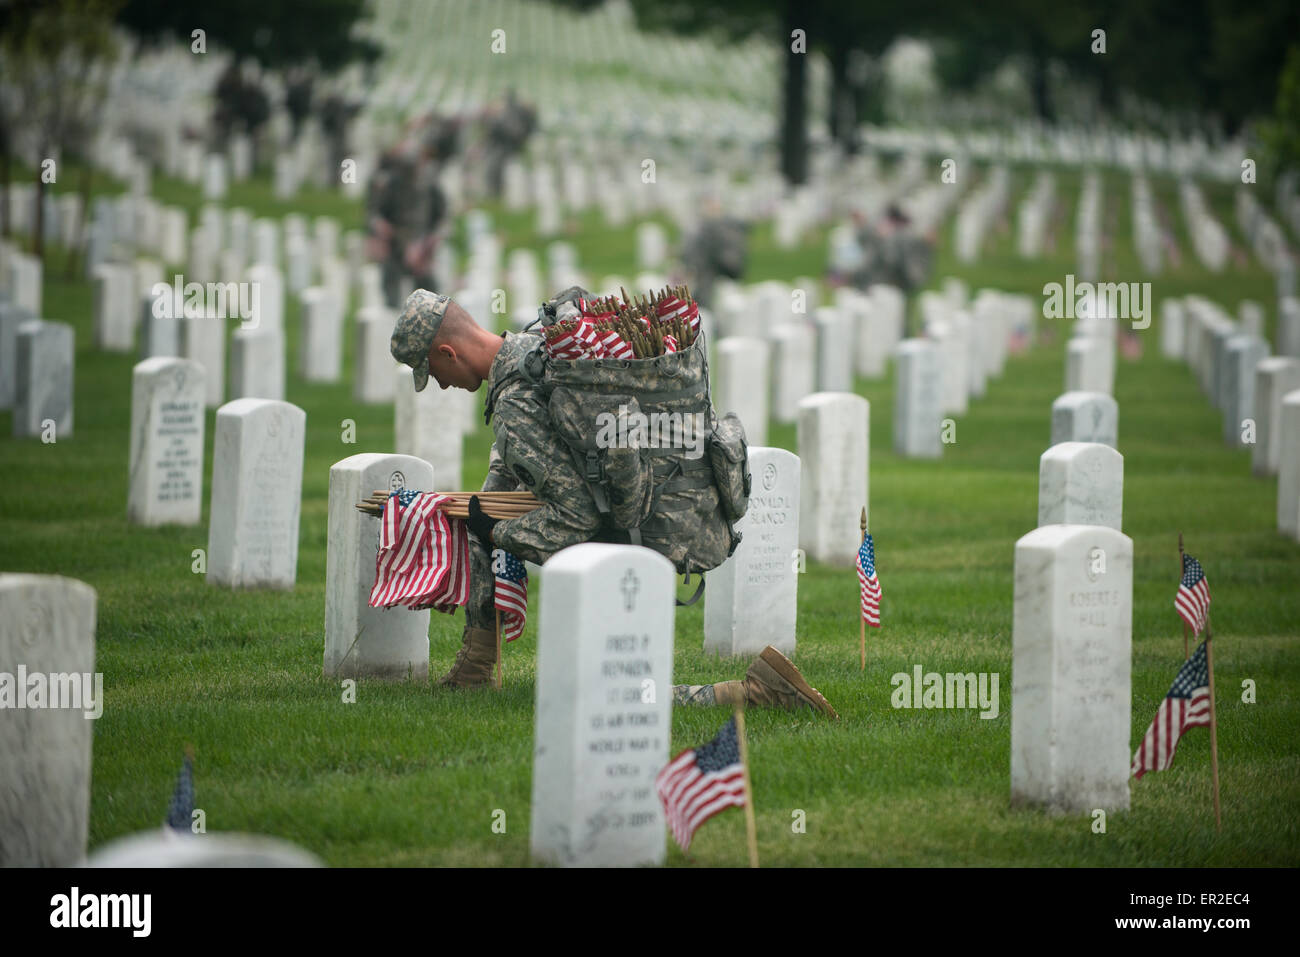 A US Army soldier from the Old Guard places flags in front of grave sites in honor of Memorial Day at Arlington National Cemetery May 21, 2015 in Arlington, Virginia. The Old Guard has conducted Flags-in, when an American flag is placed at every headstone, since 1948. Stock Photo